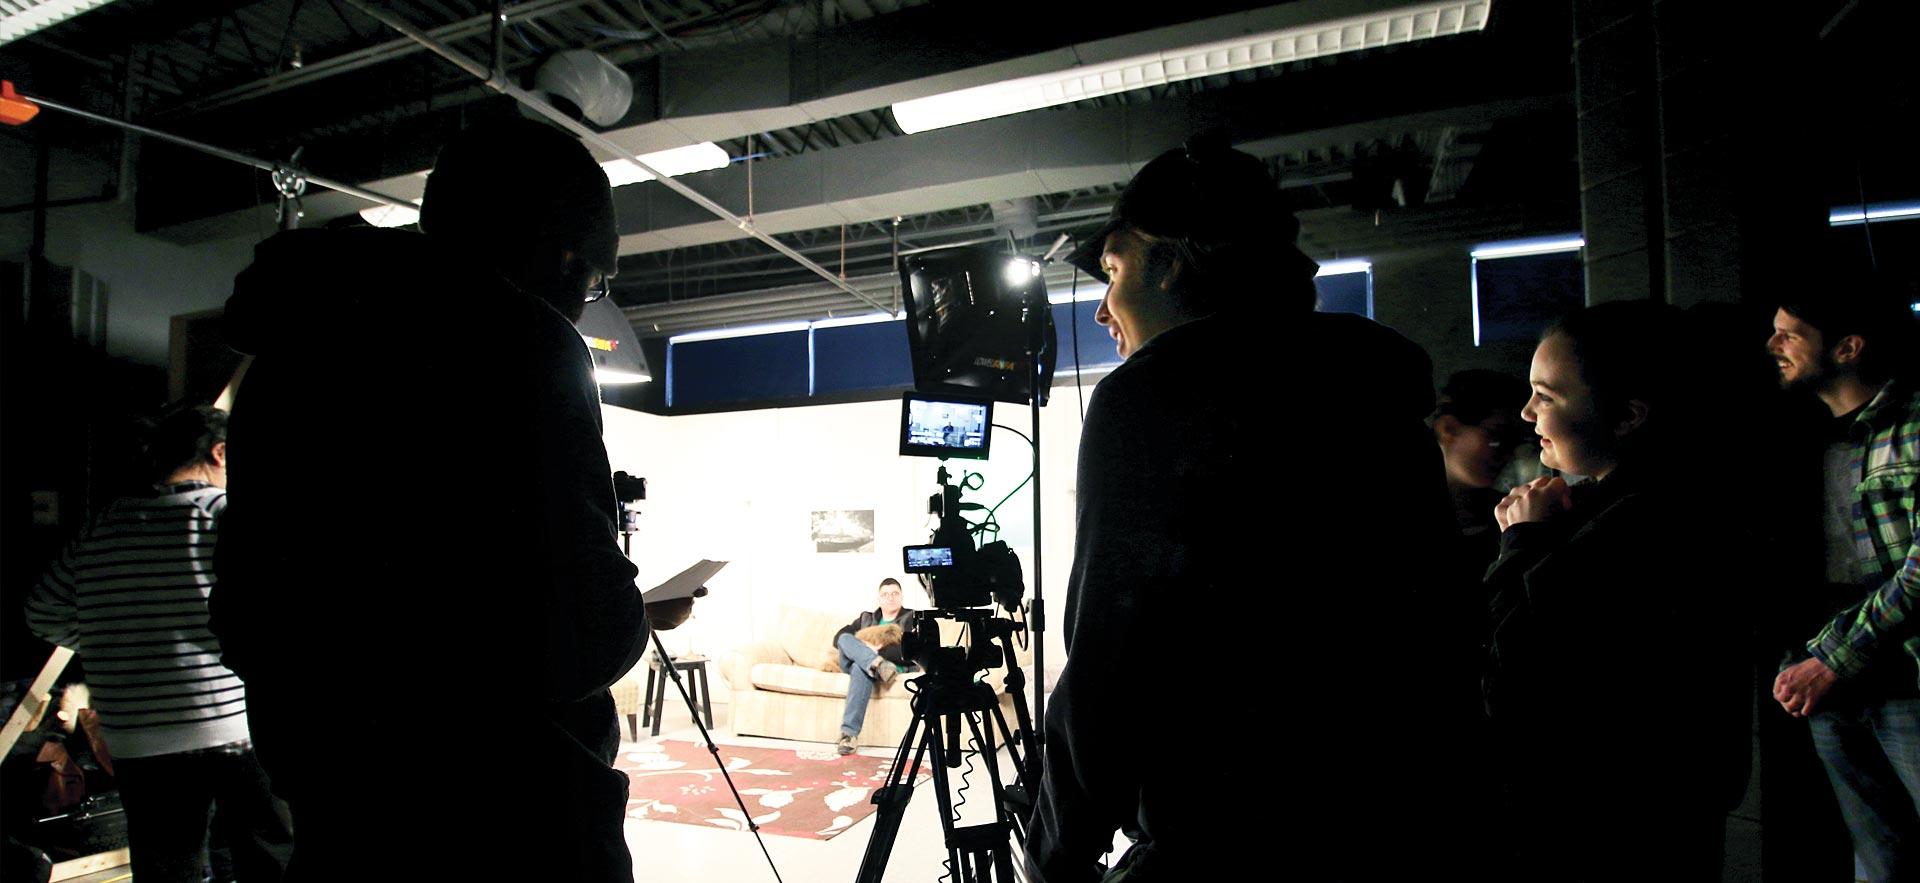 A Digital Film Production class collaborate together in a film class. 